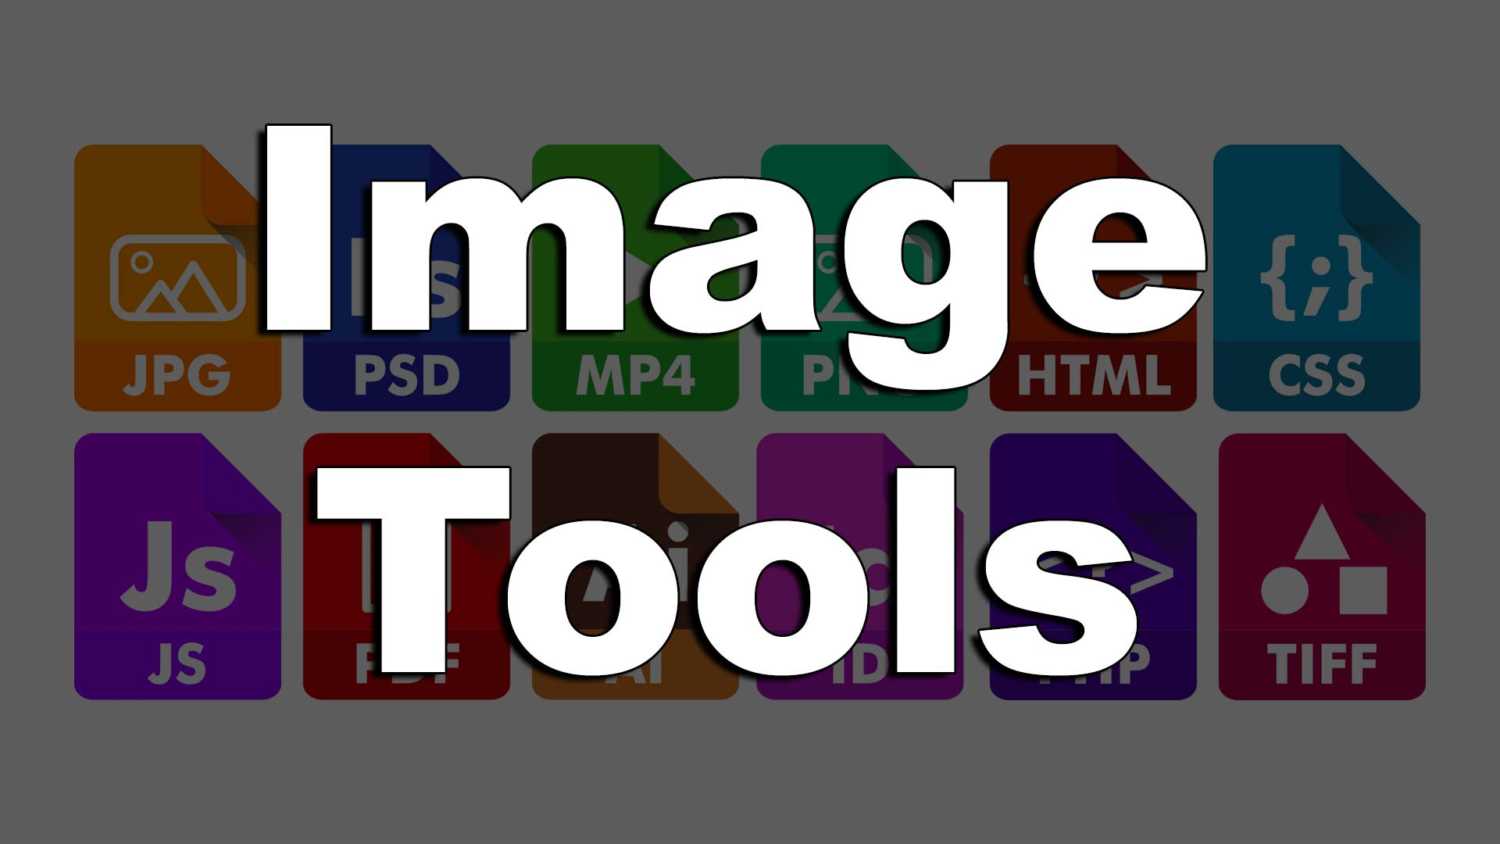 online-image-converter-free-tool-to-convert-images-to-other-formats